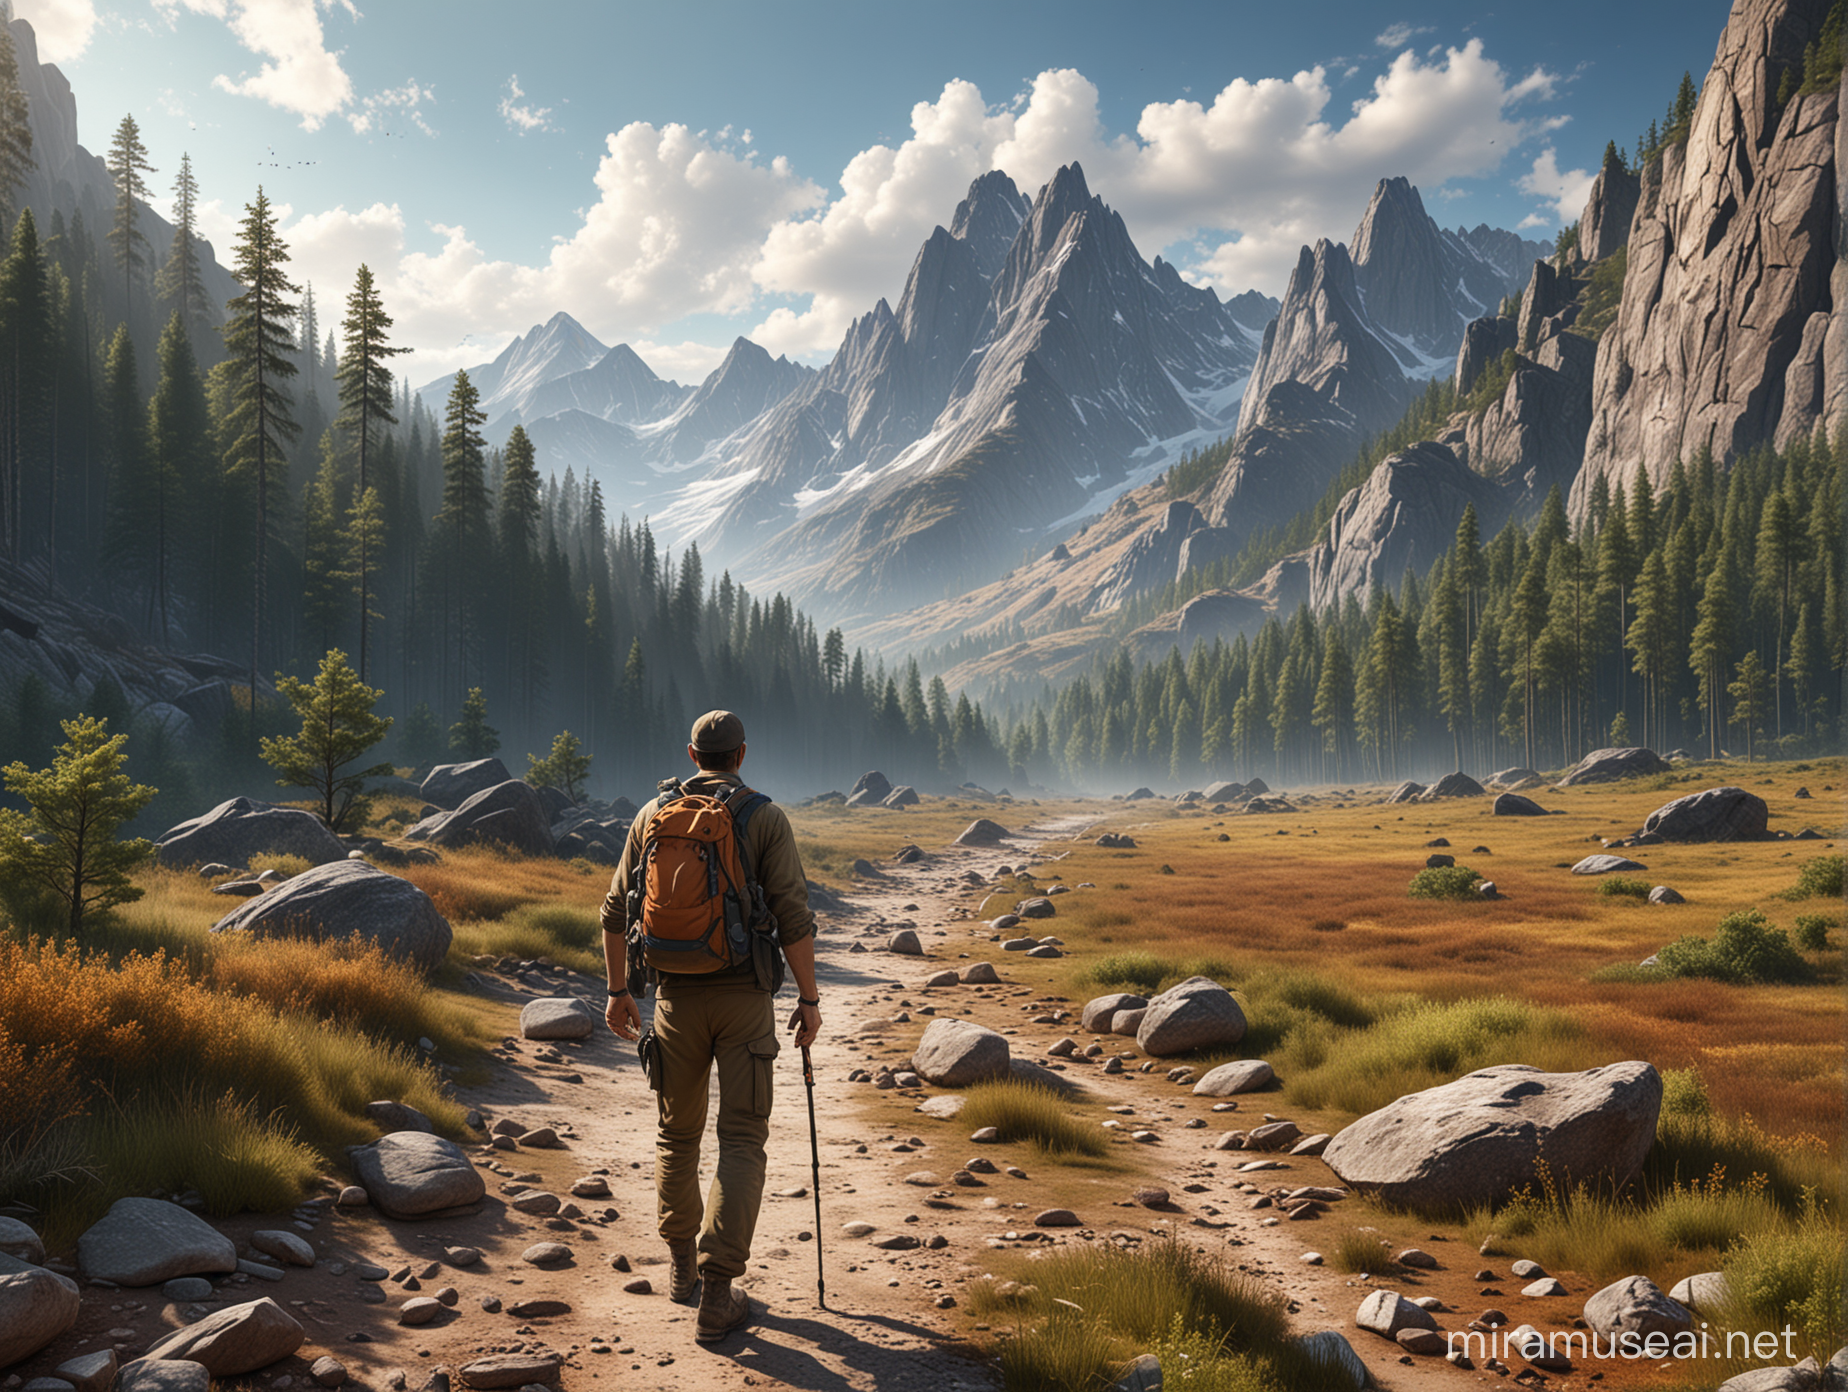 Realistic Mountain Landscape with Geologist Exploring